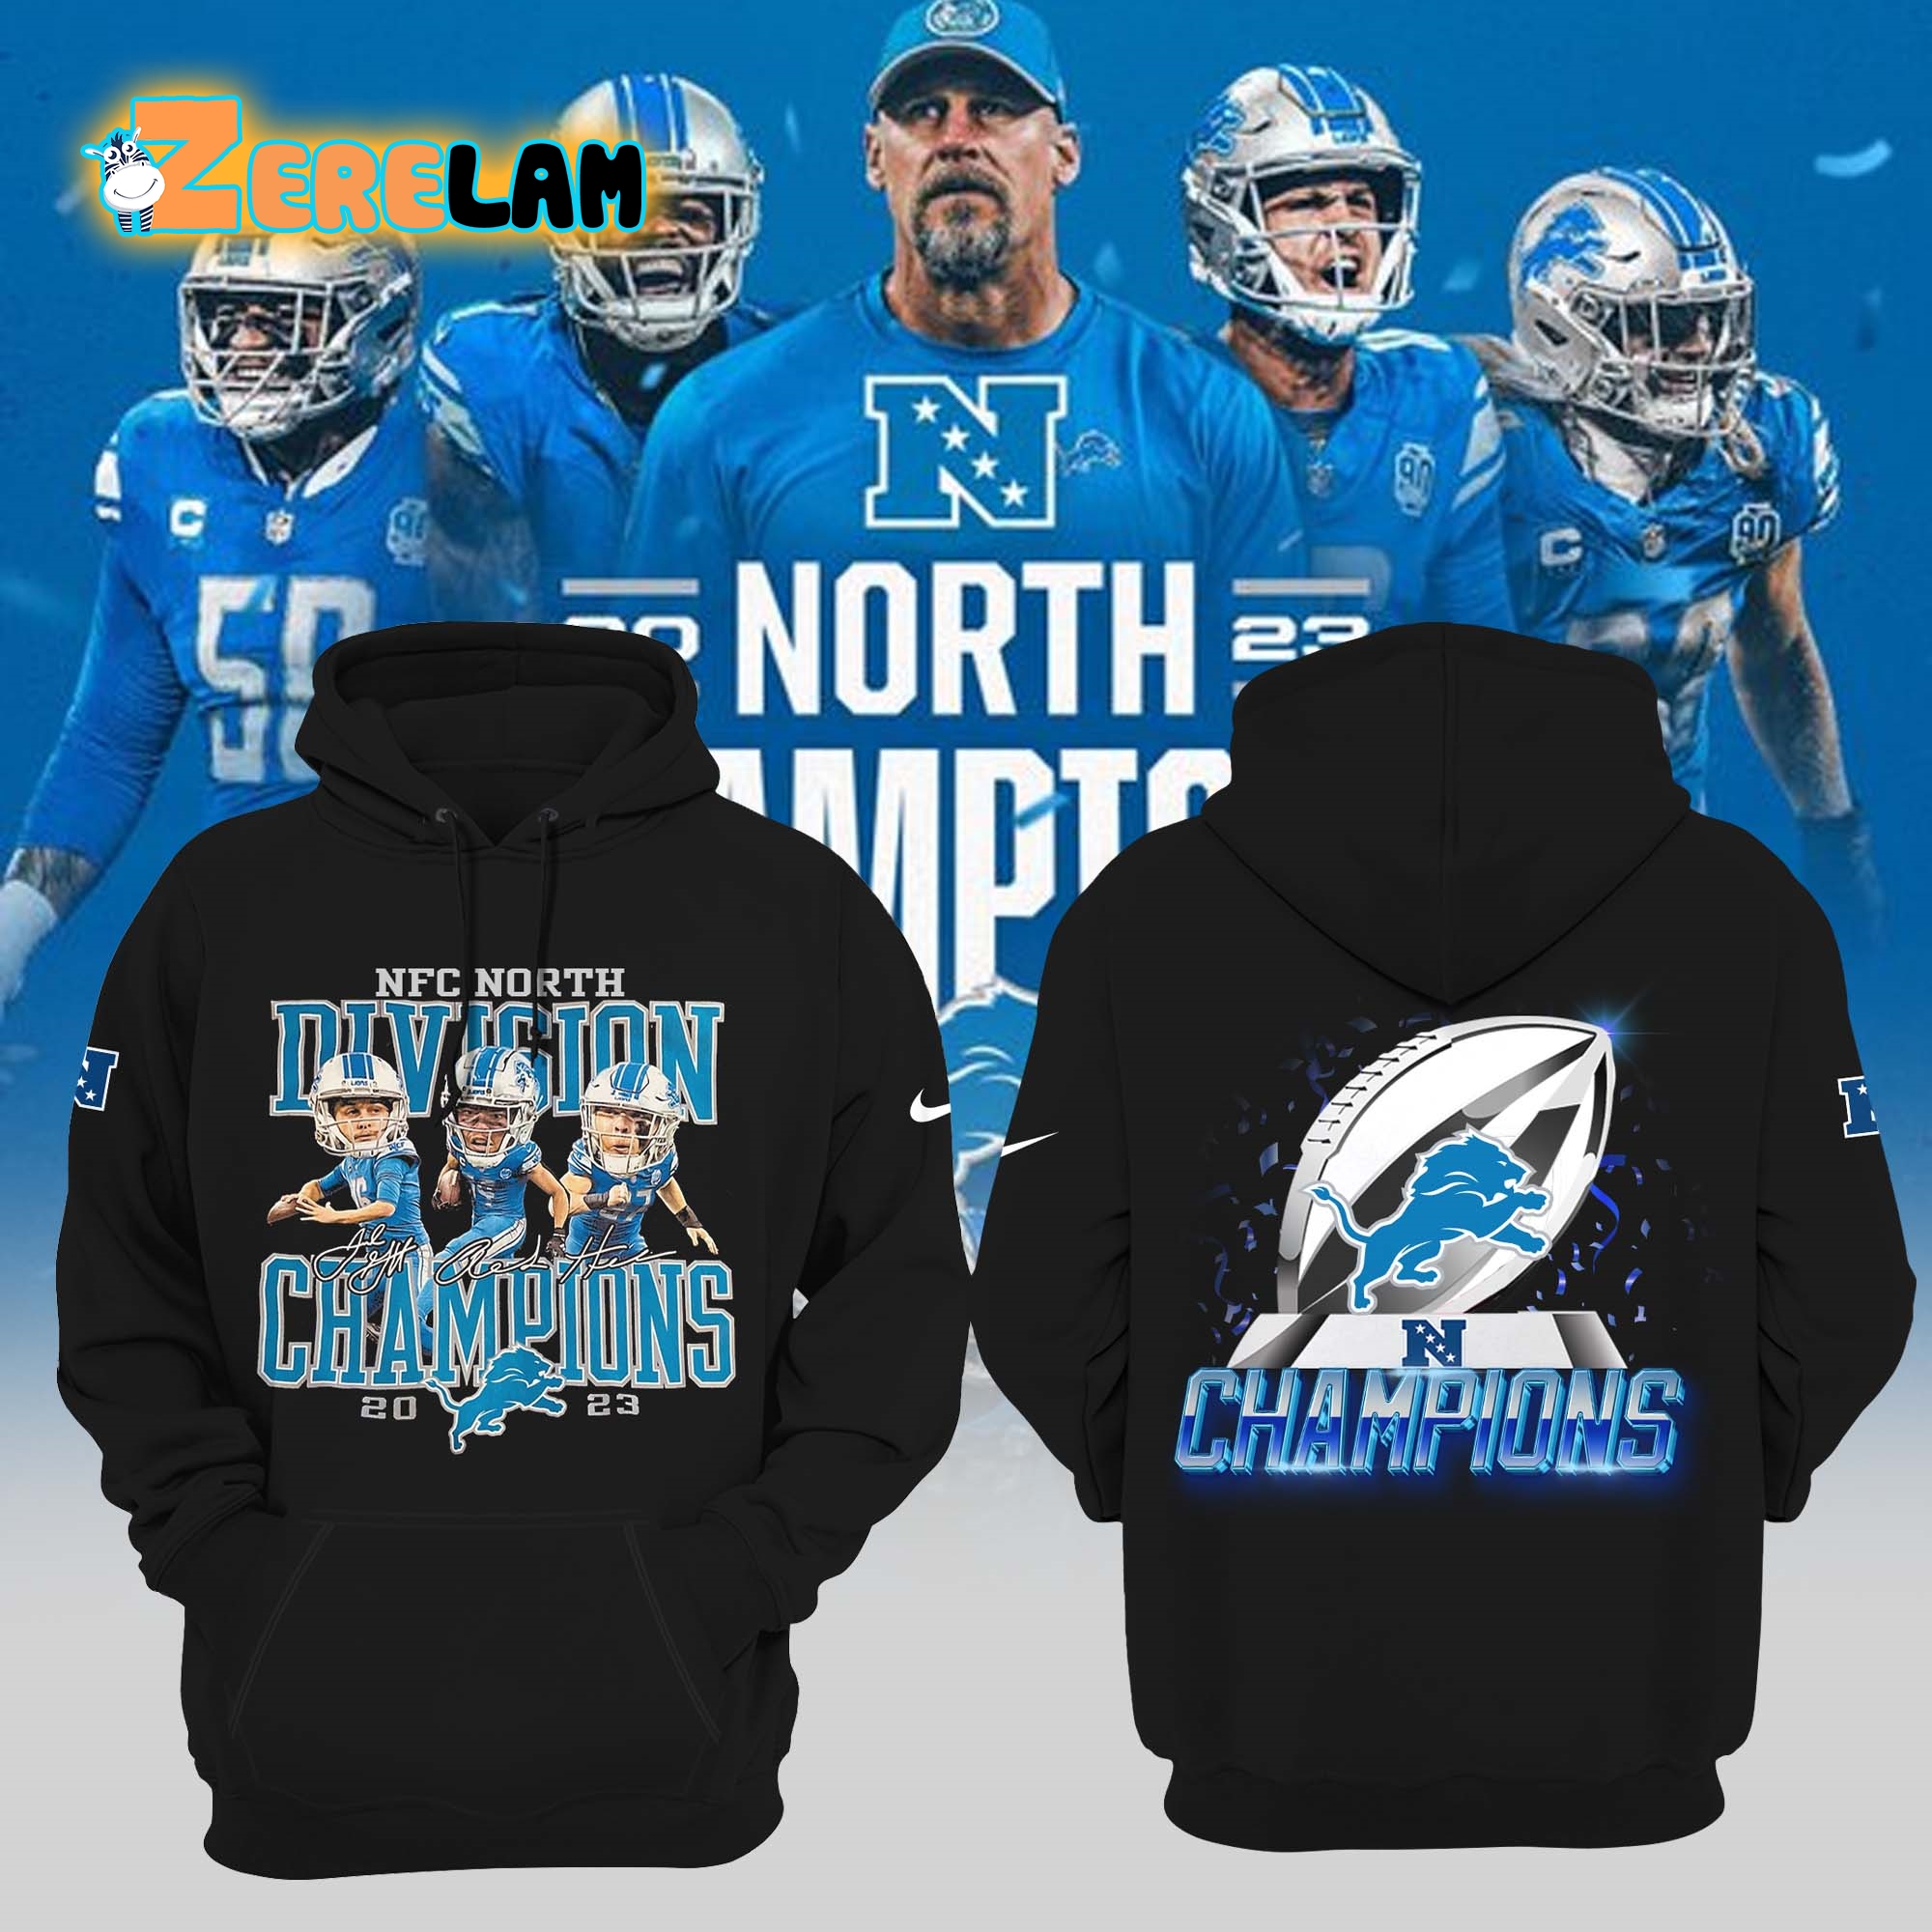 Lions NFC North Division Champions 2023 Hoodie - Zerelam